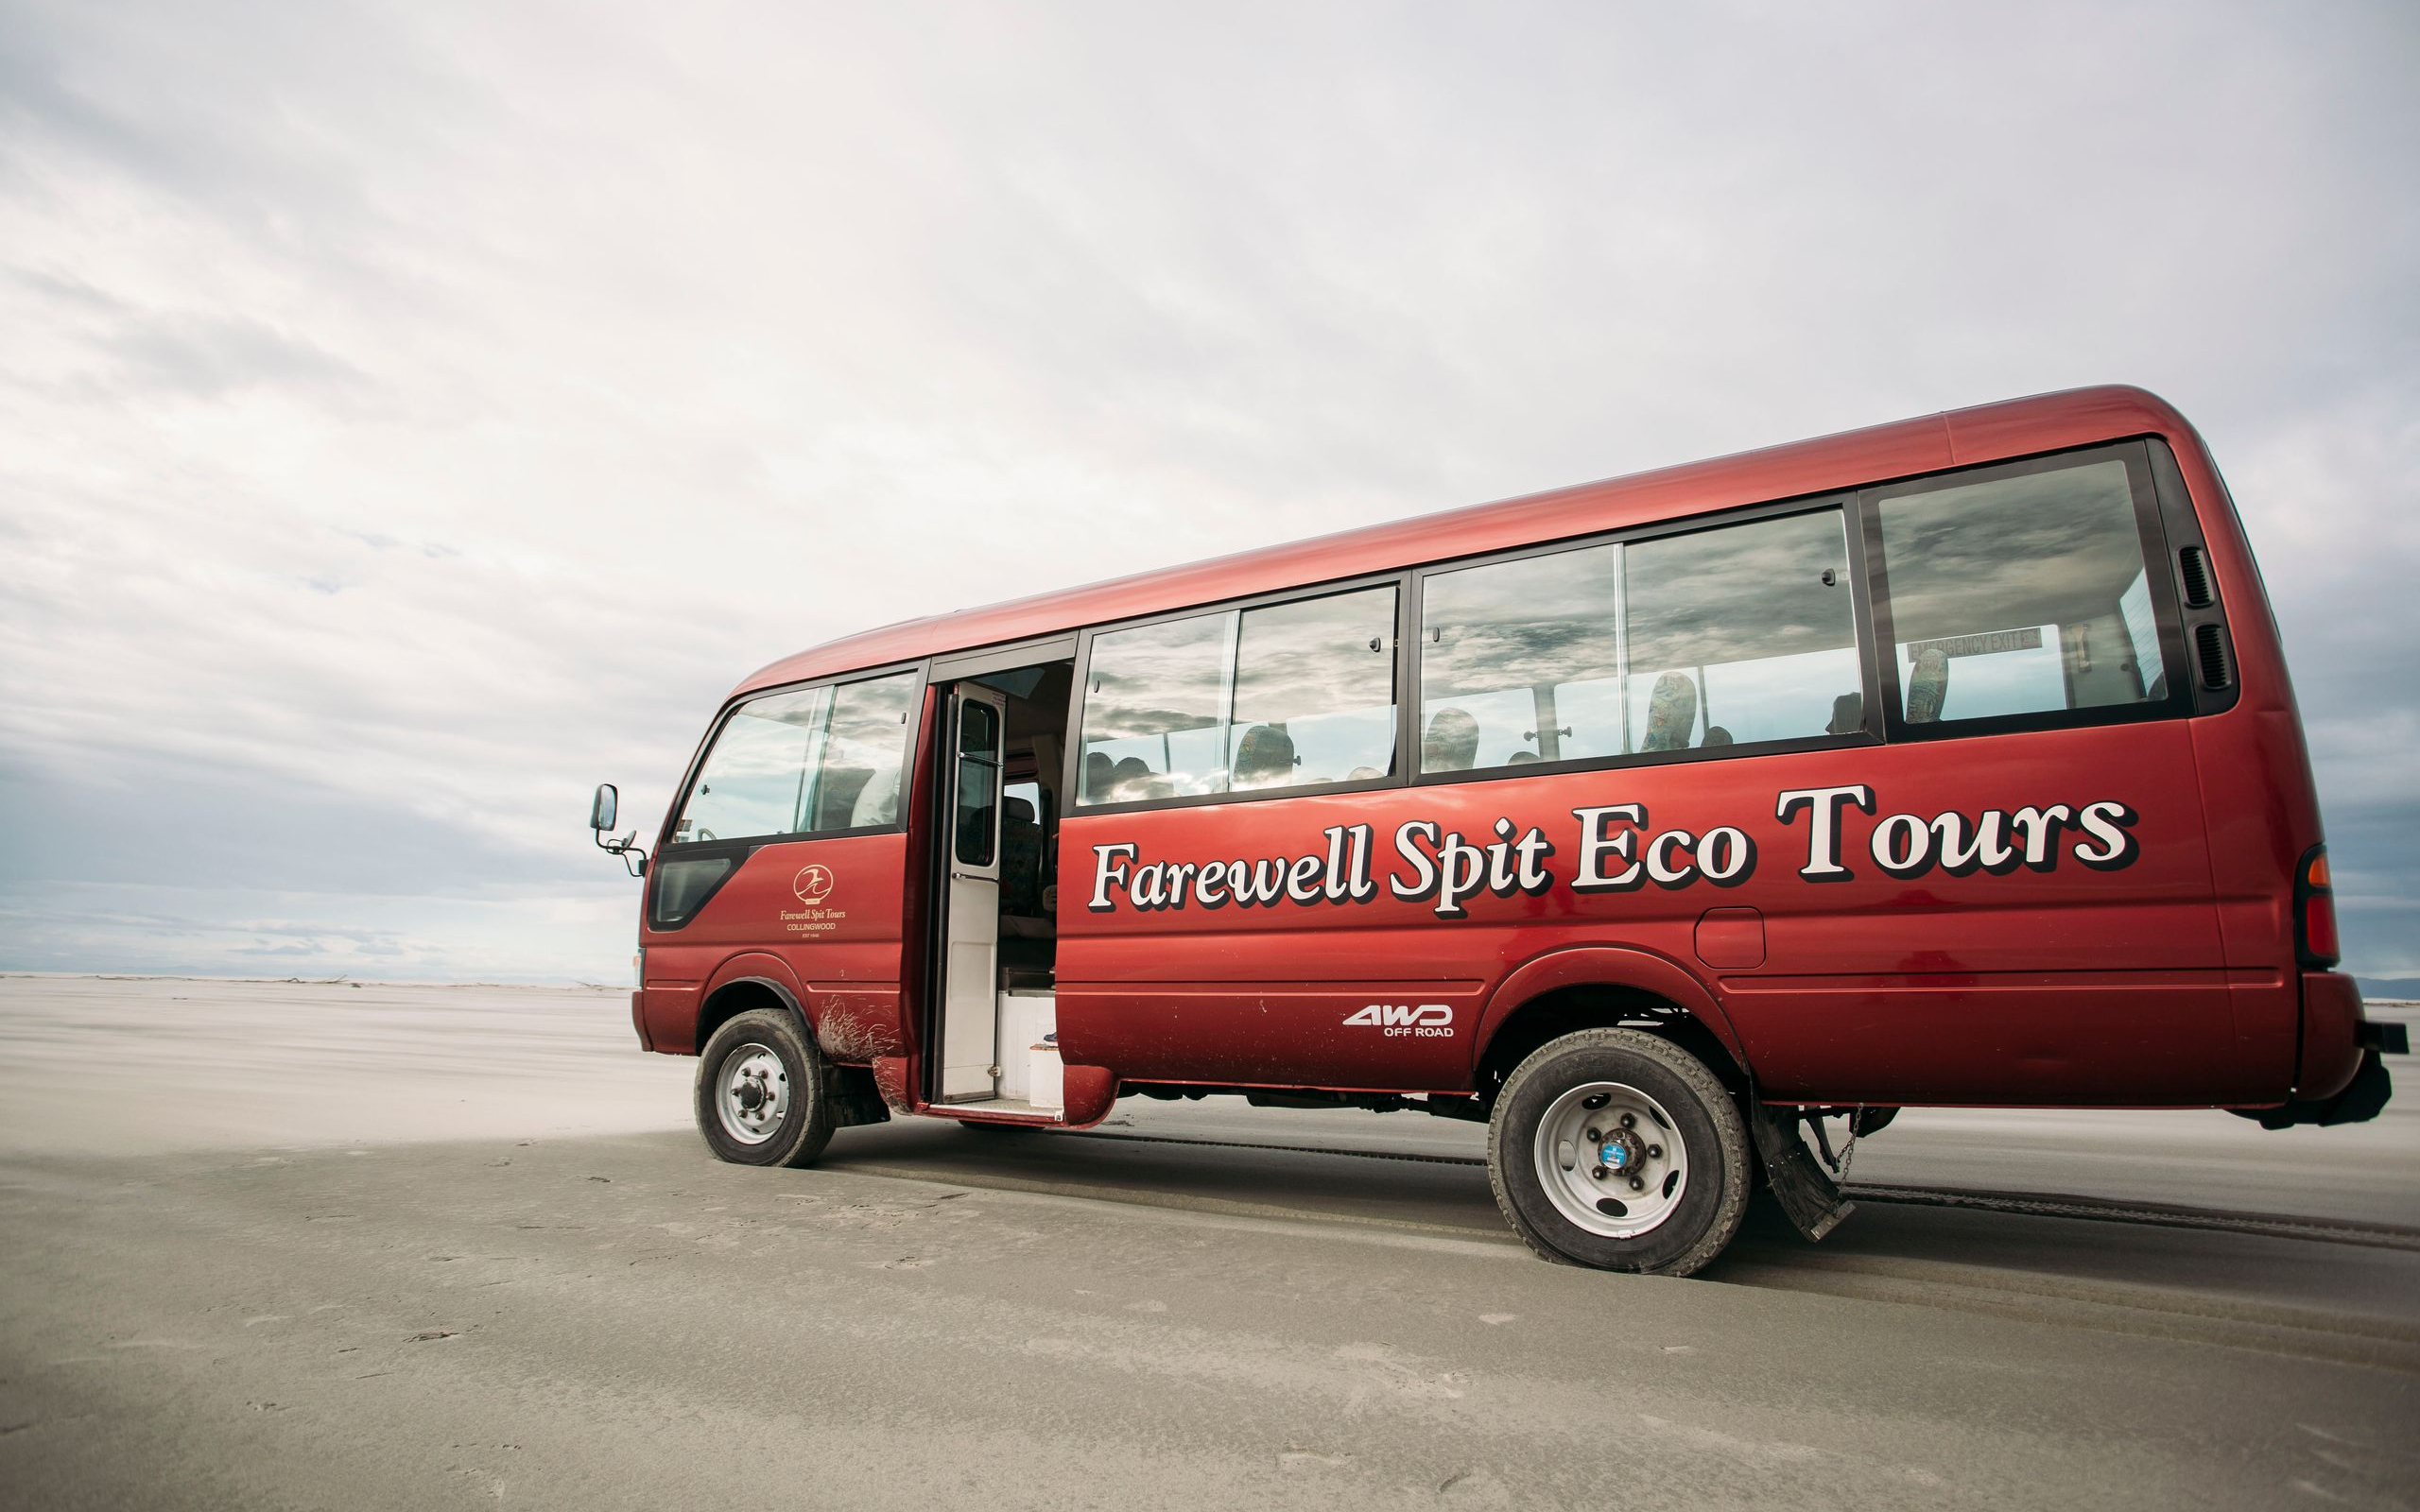 Farwell Spit Tours bus